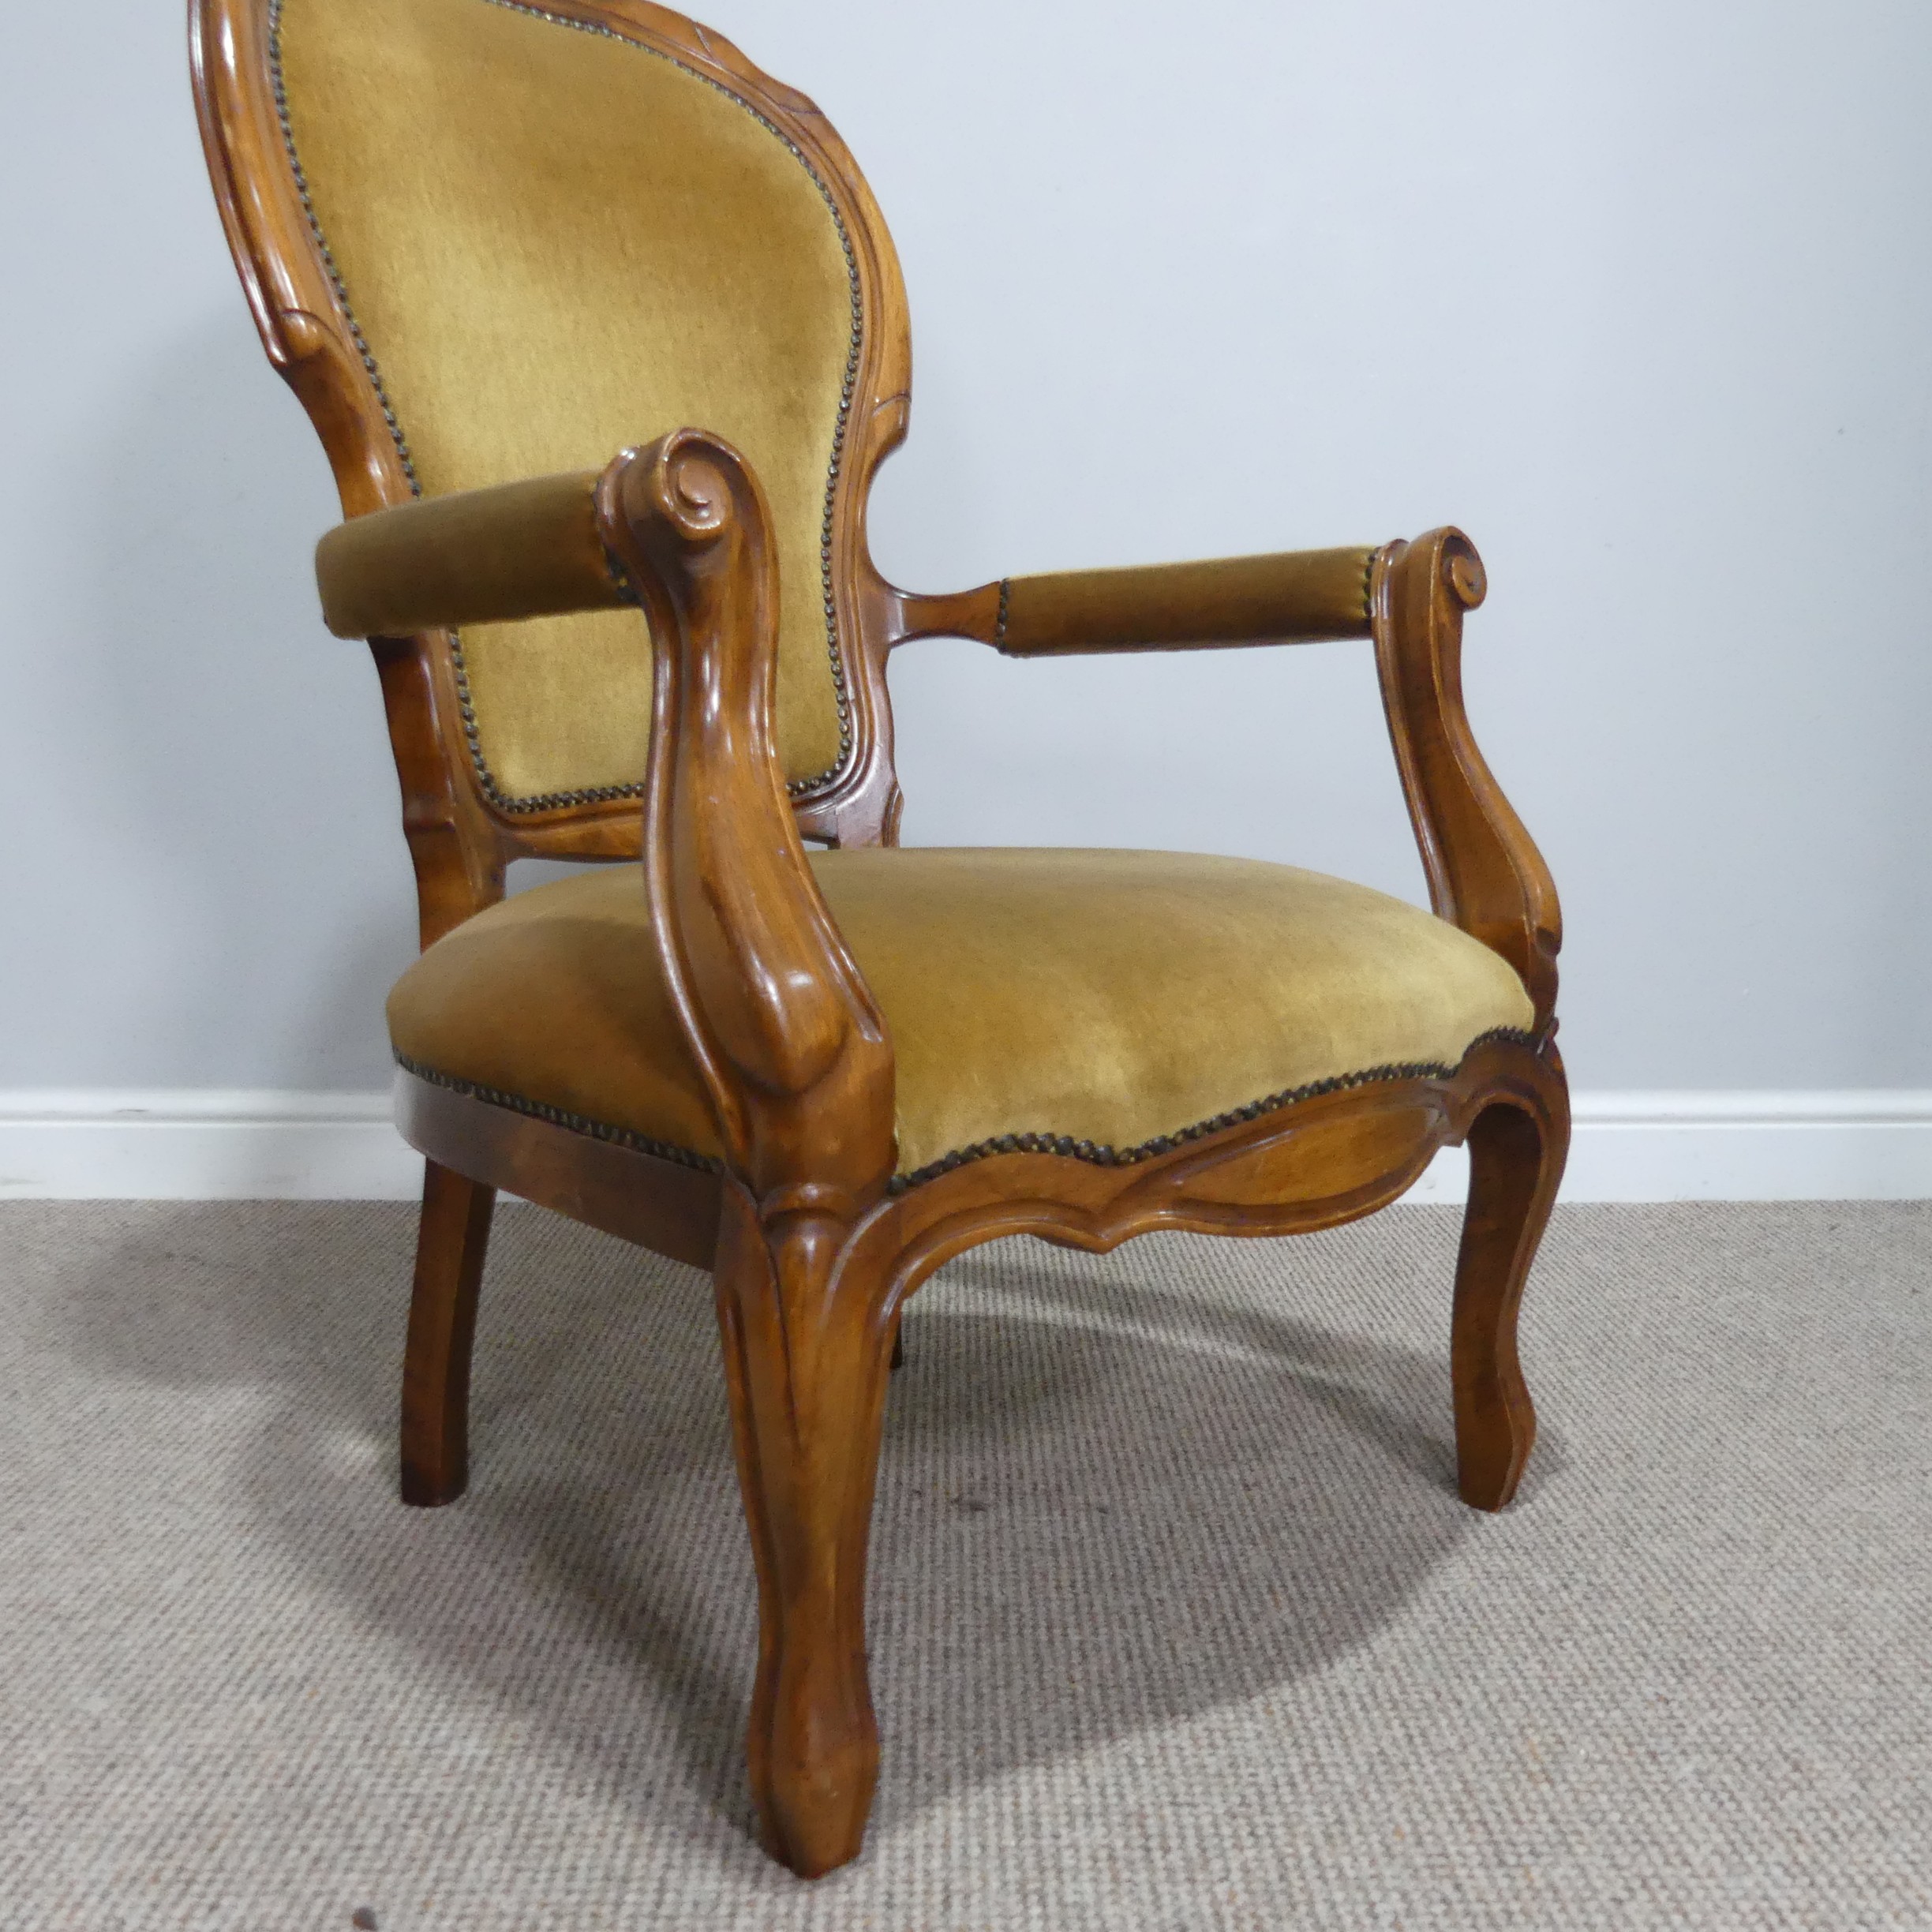 A Victorian mahogany upholstered open Armchair, W 62cm x H 106.5 cm x D 60 cm. - Image 3 of 7